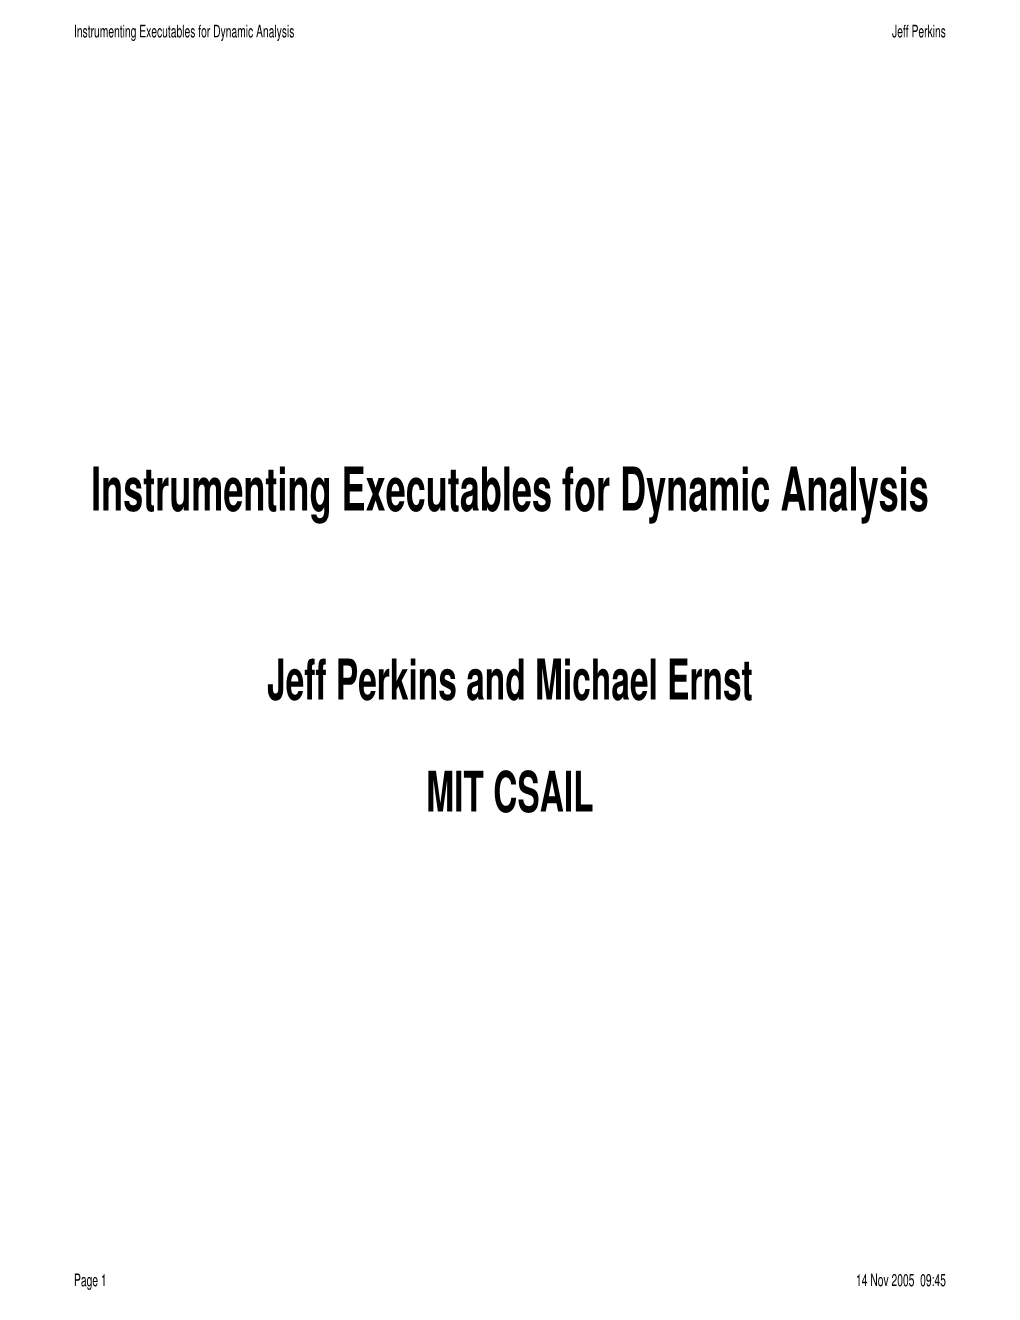 Instrumenting Executables for Dynamic Analysis Jeff Perkins